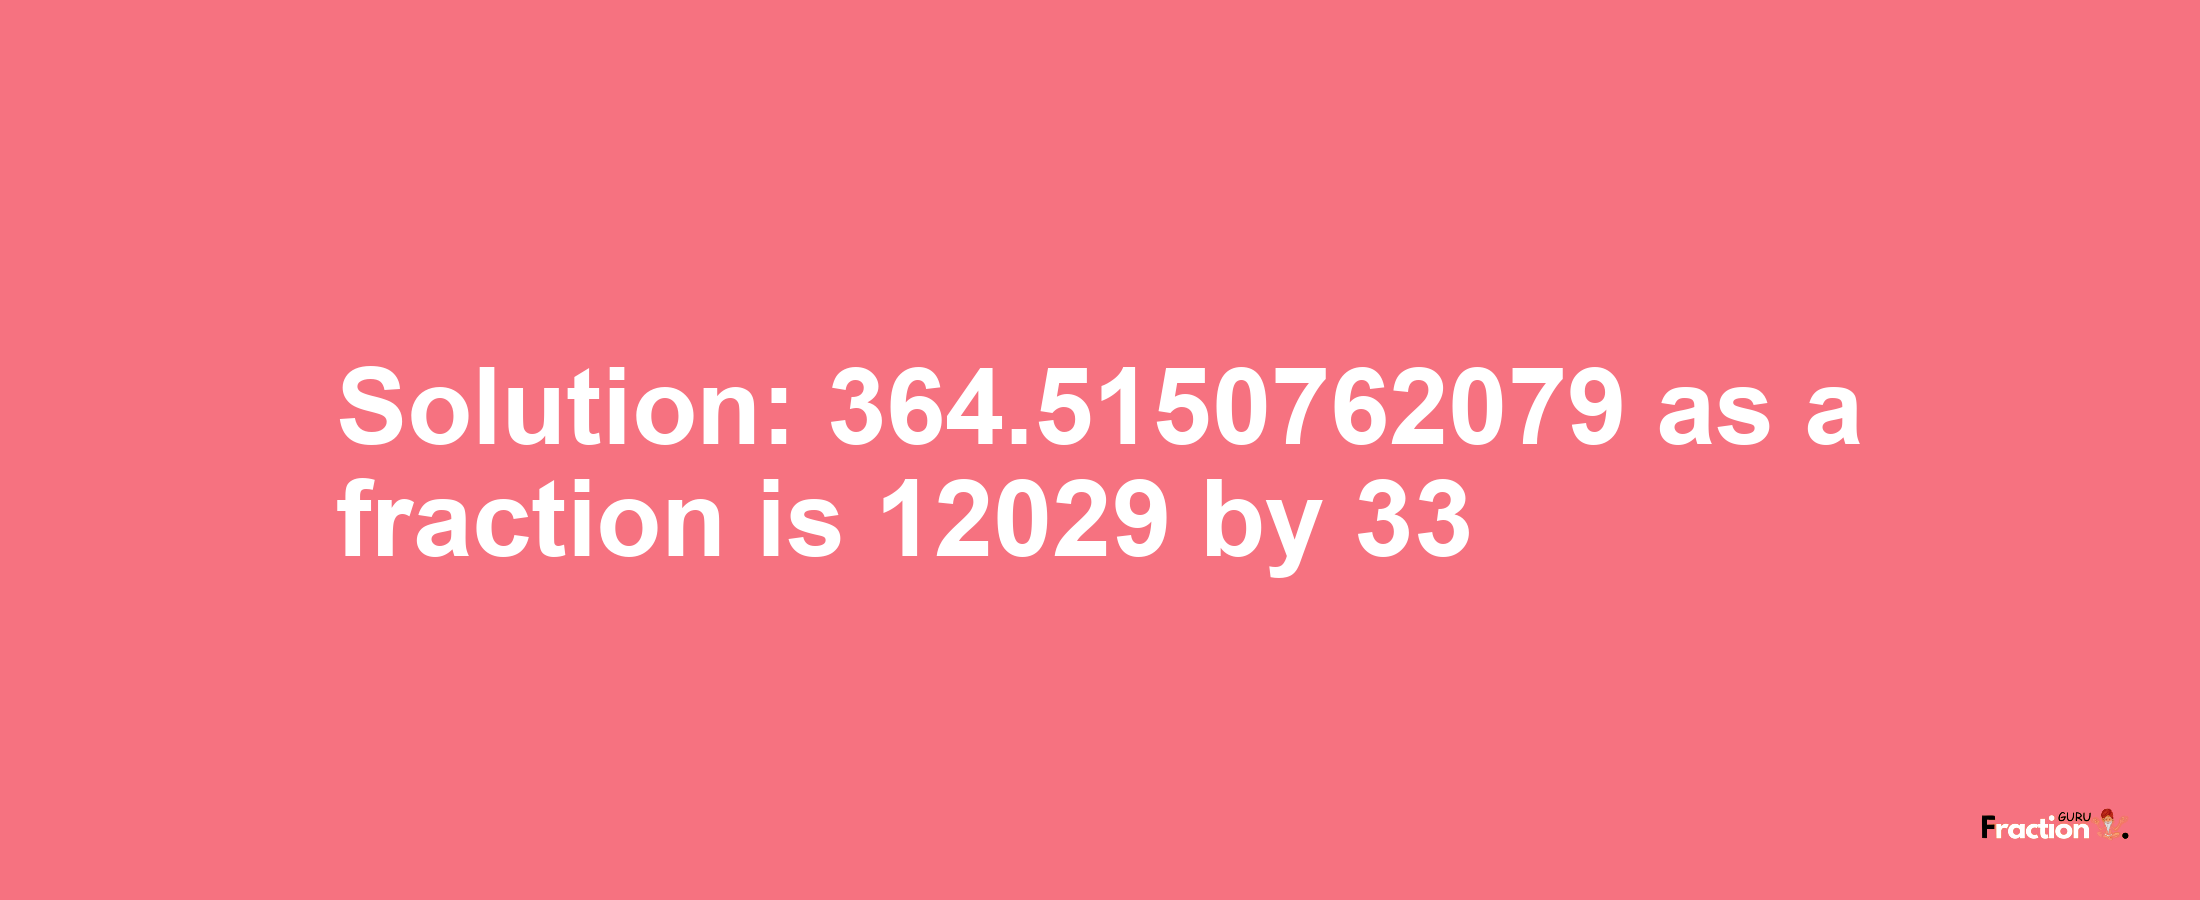 Solution:364.5150762079 as a fraction is 12029/33